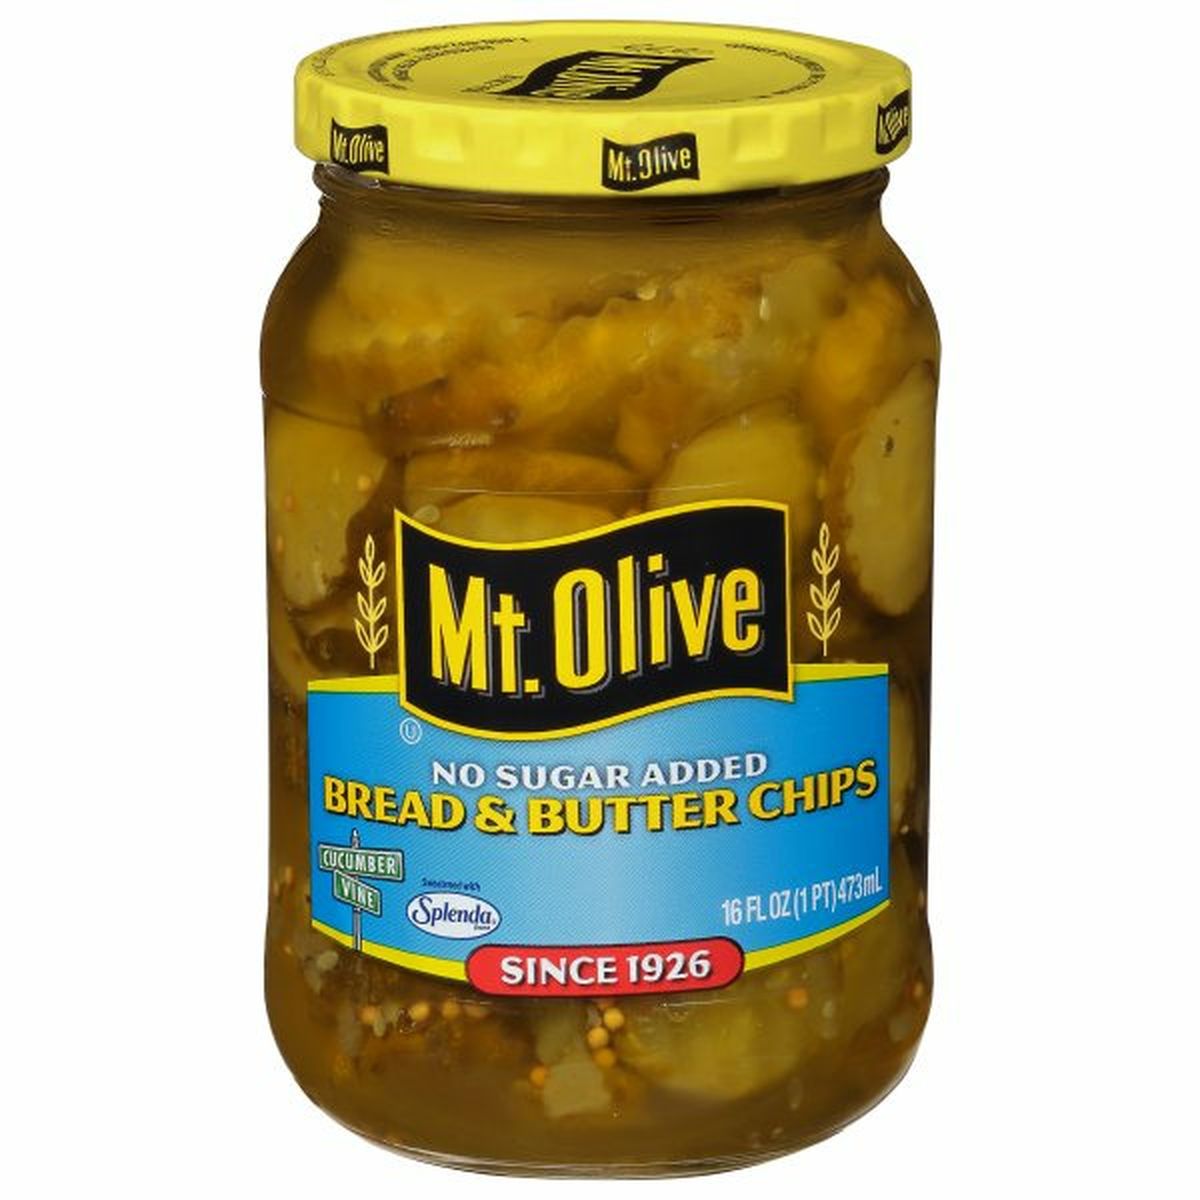 Calories in Mt. Olive Pickles, No Sugar Added, Bread & Butter Chips